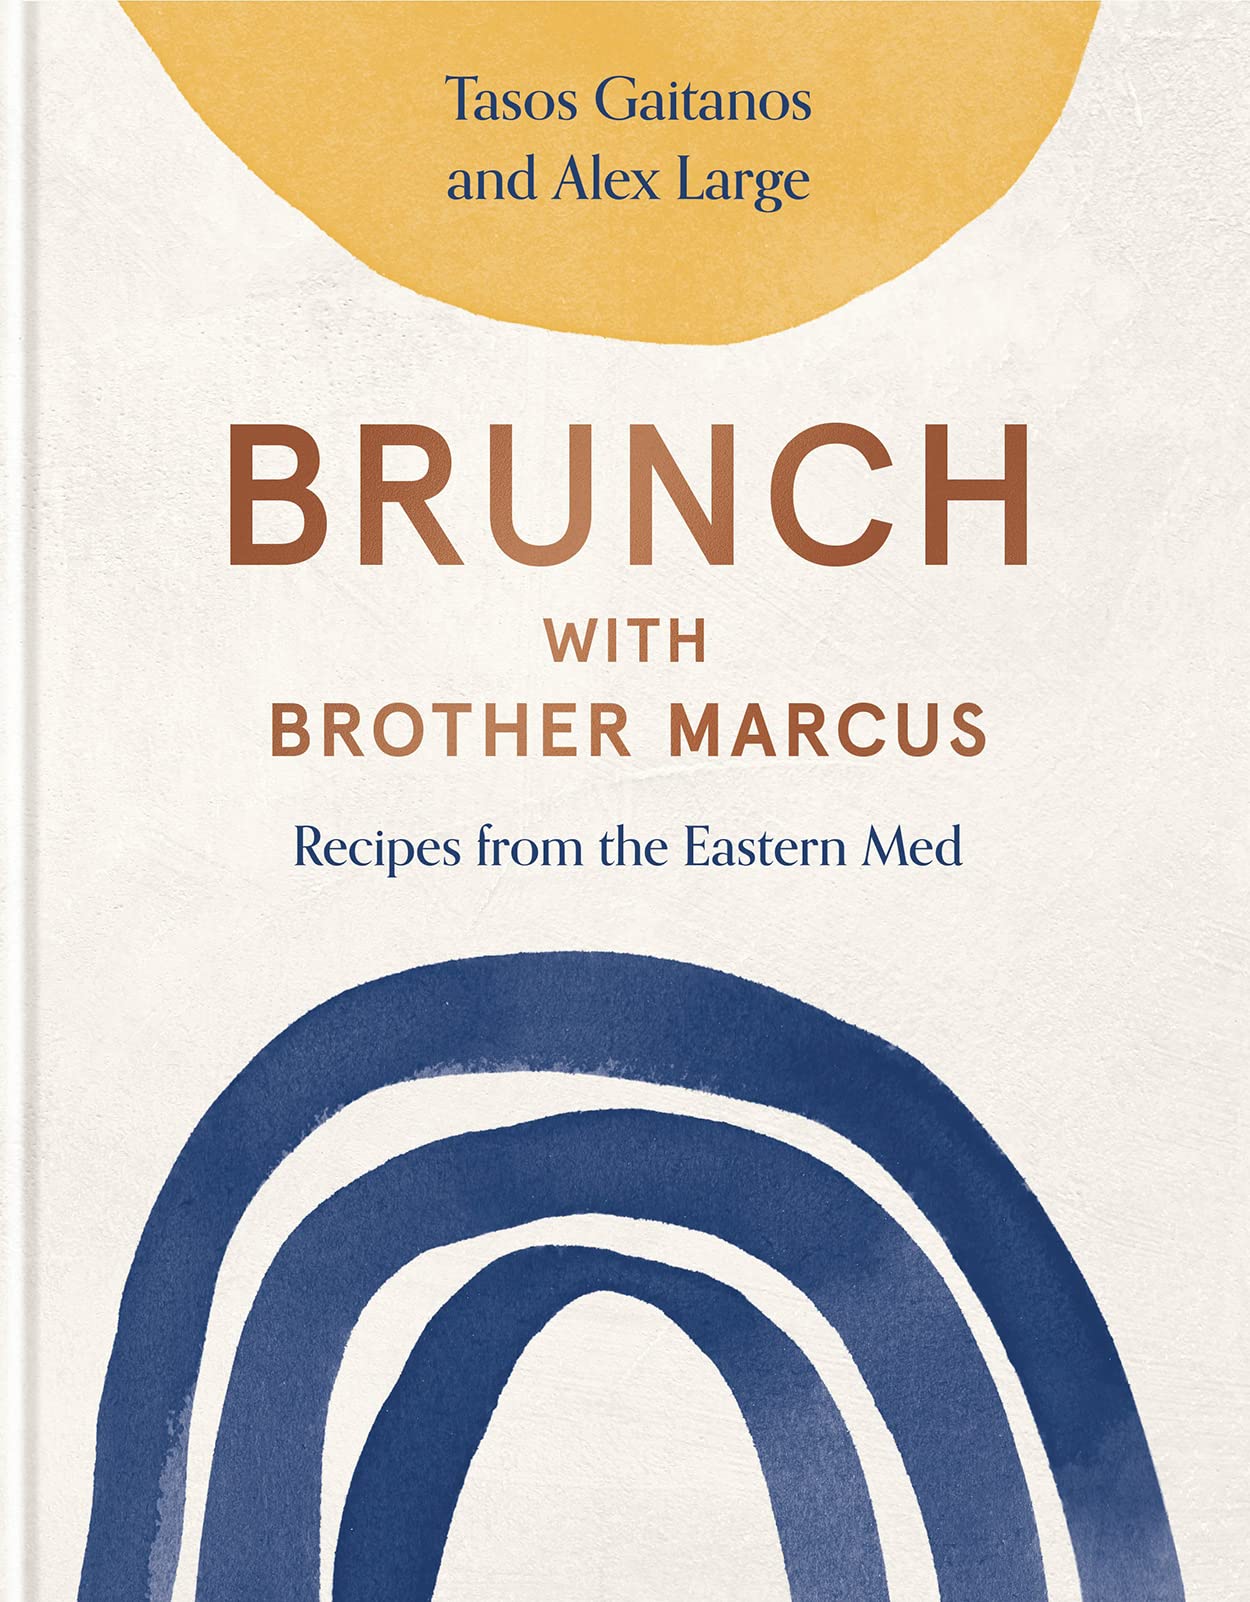 Brunch with Brother Marcus: Recipes from the Eastern Med (Tasos Gaitanos, Alex Large)